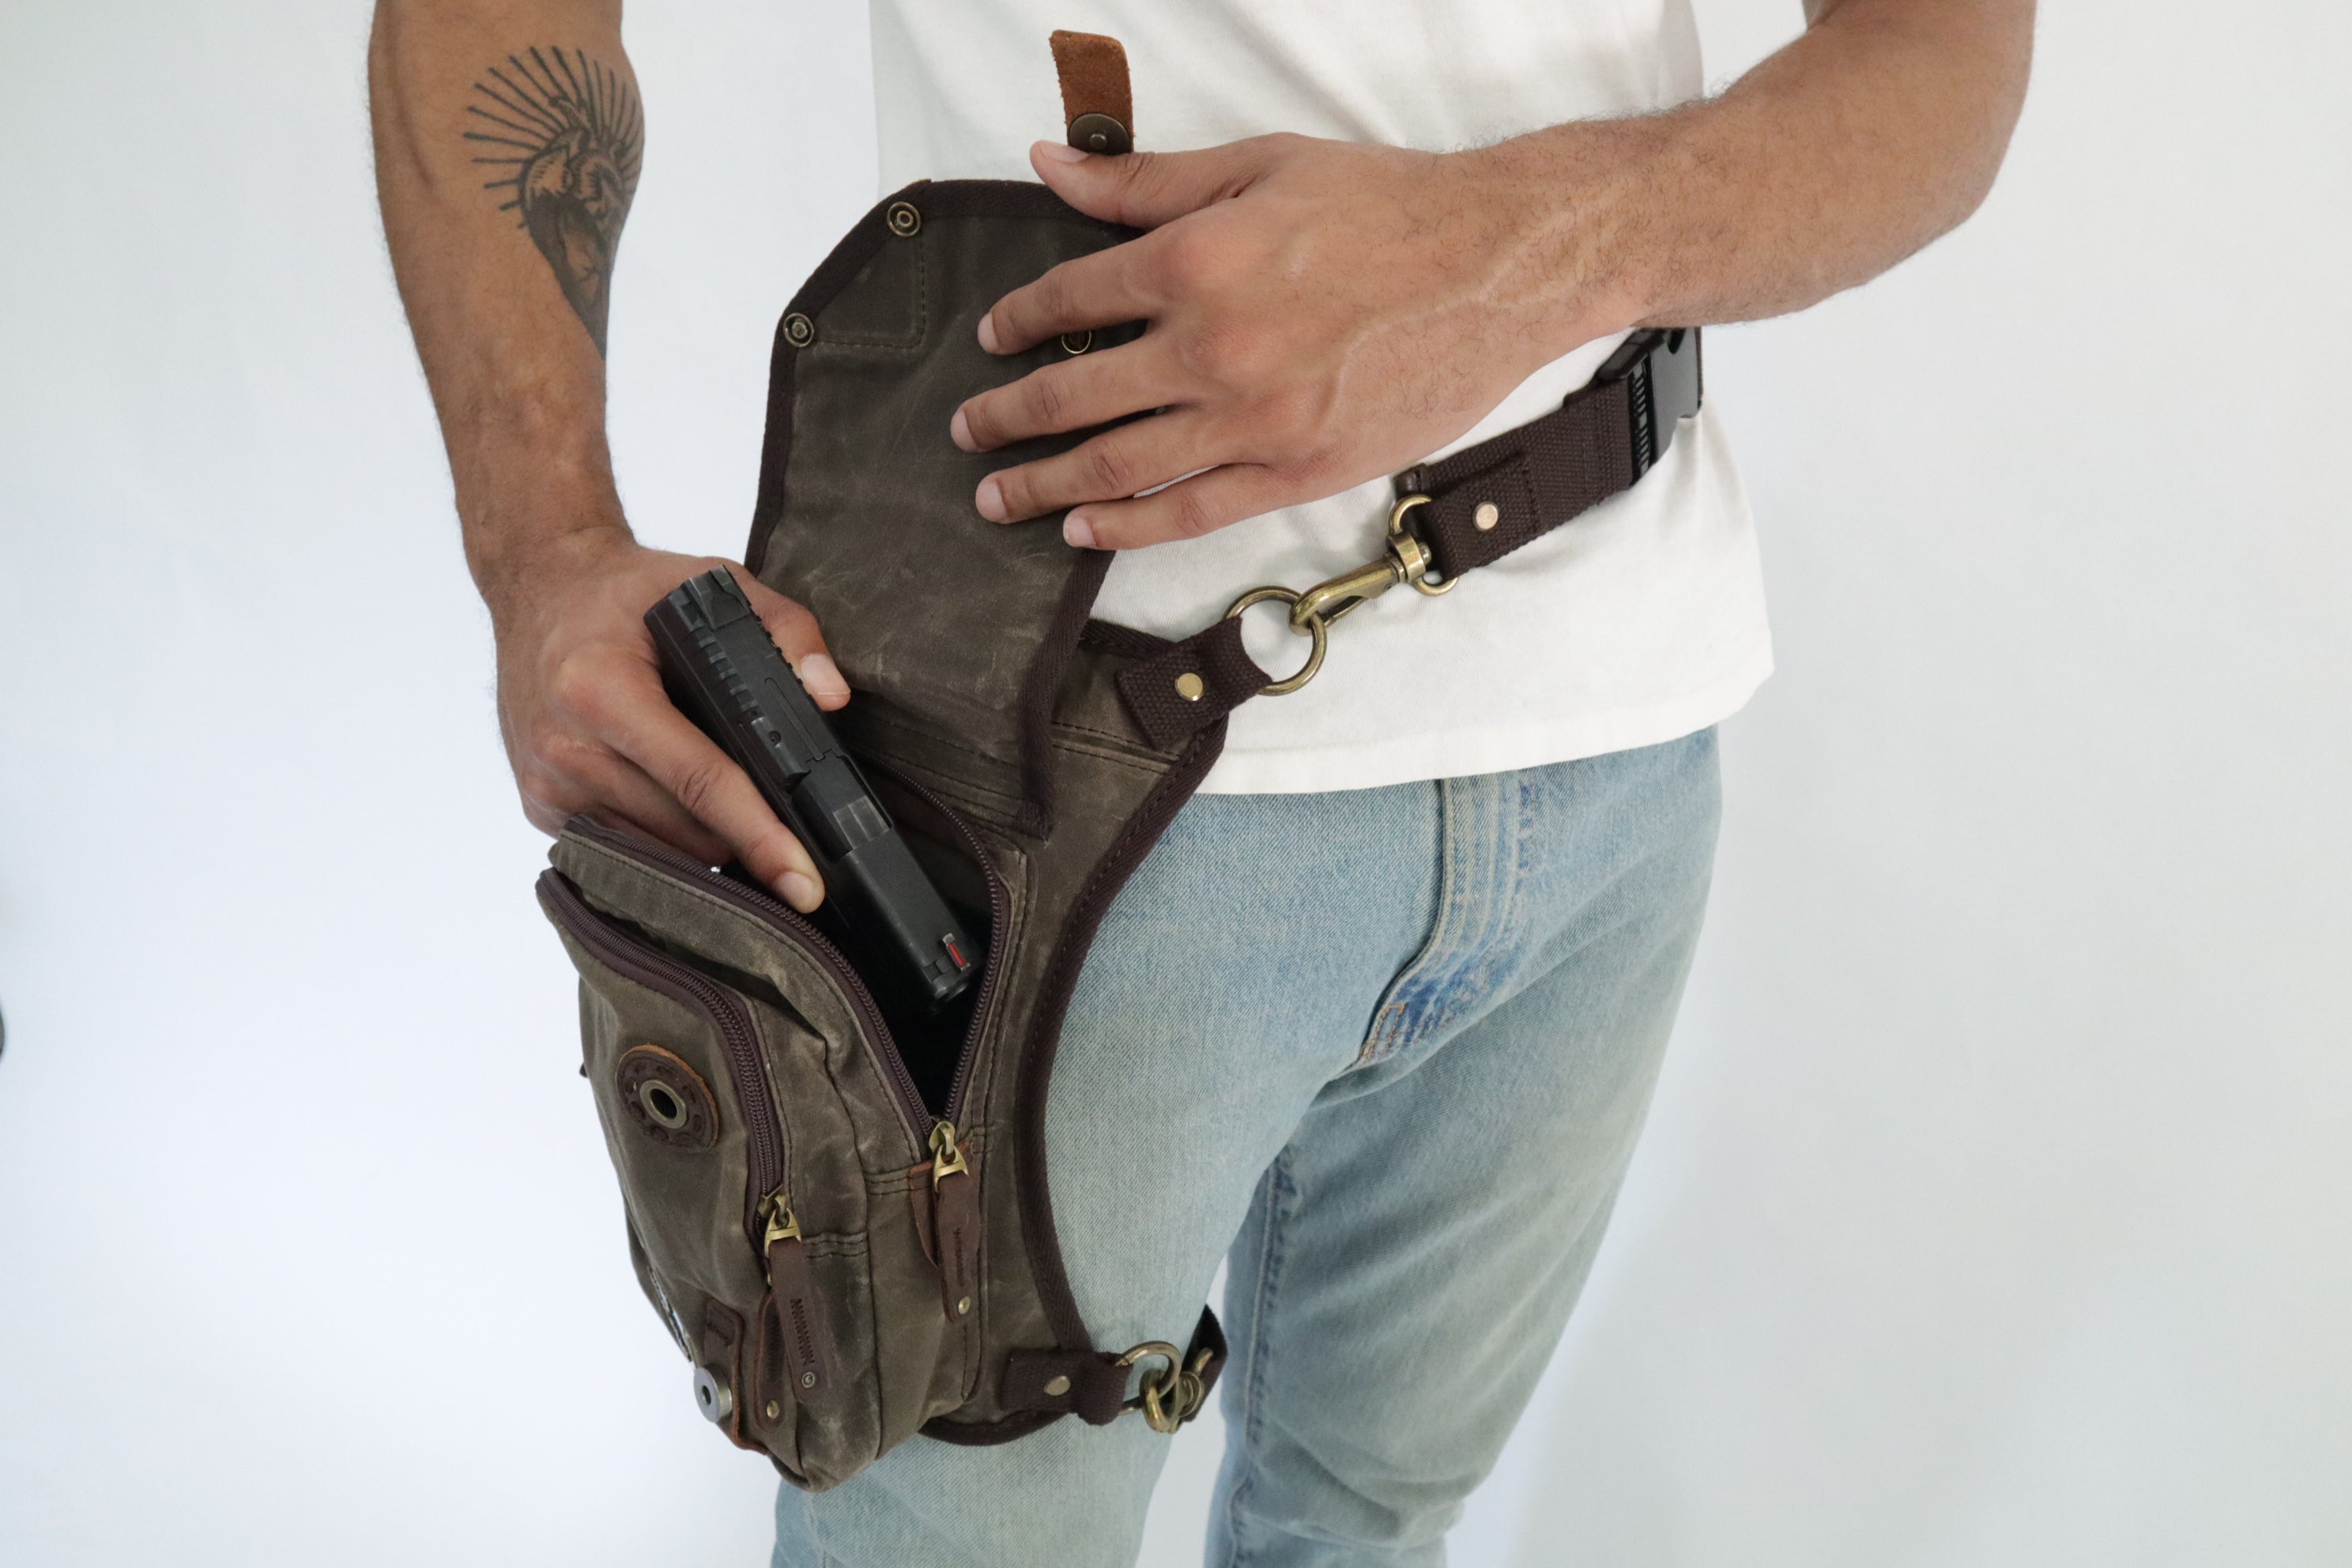 The Tuesday Concealed Carry Satchel – Zendira